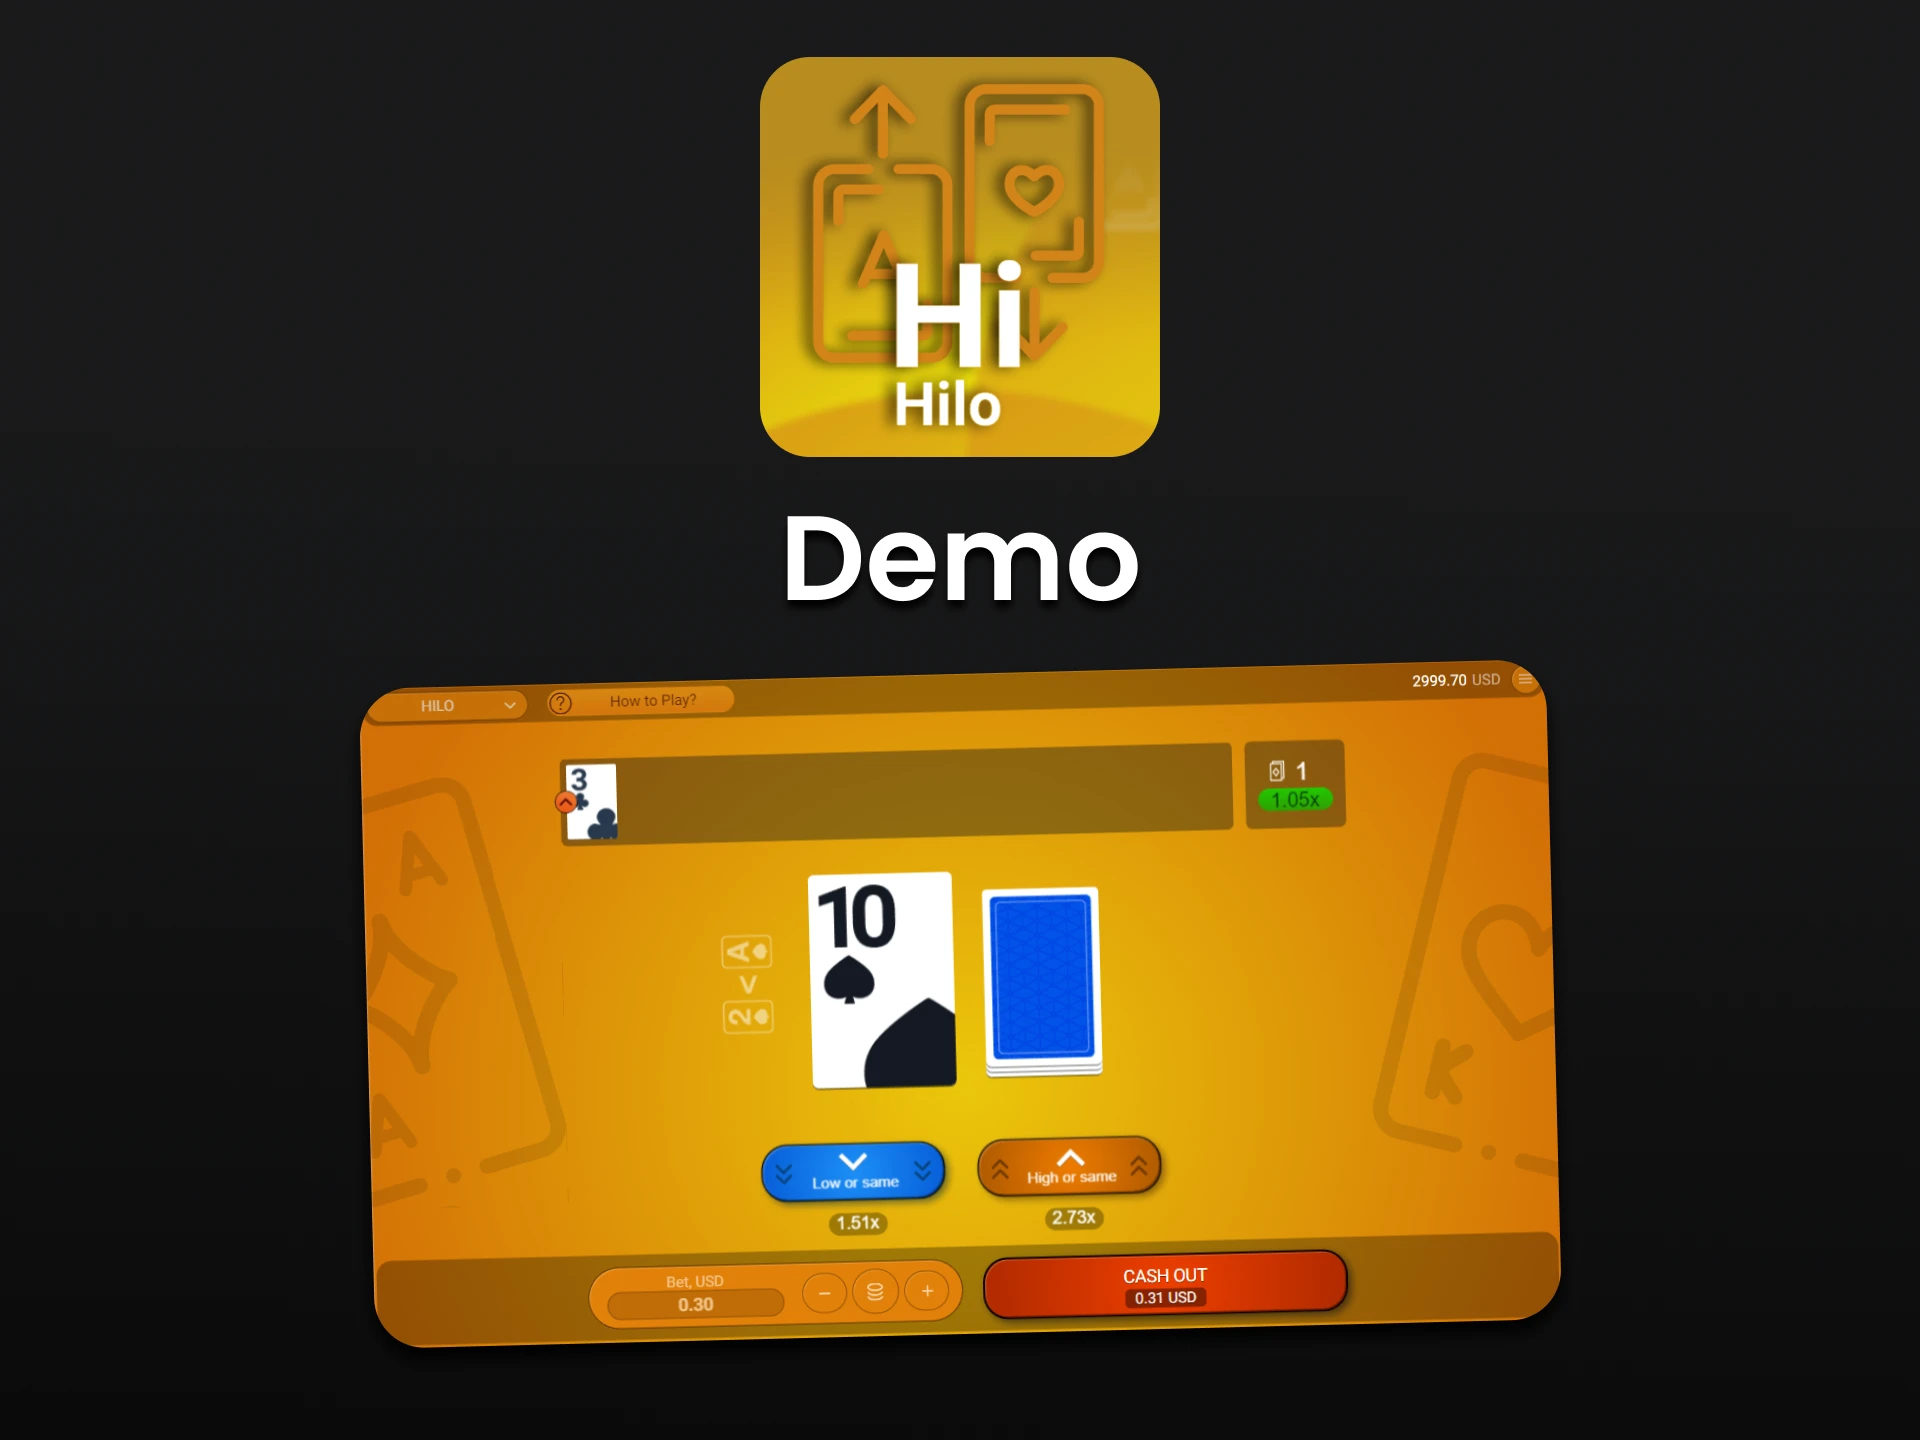 Practice in the demo version of the Hilo game.